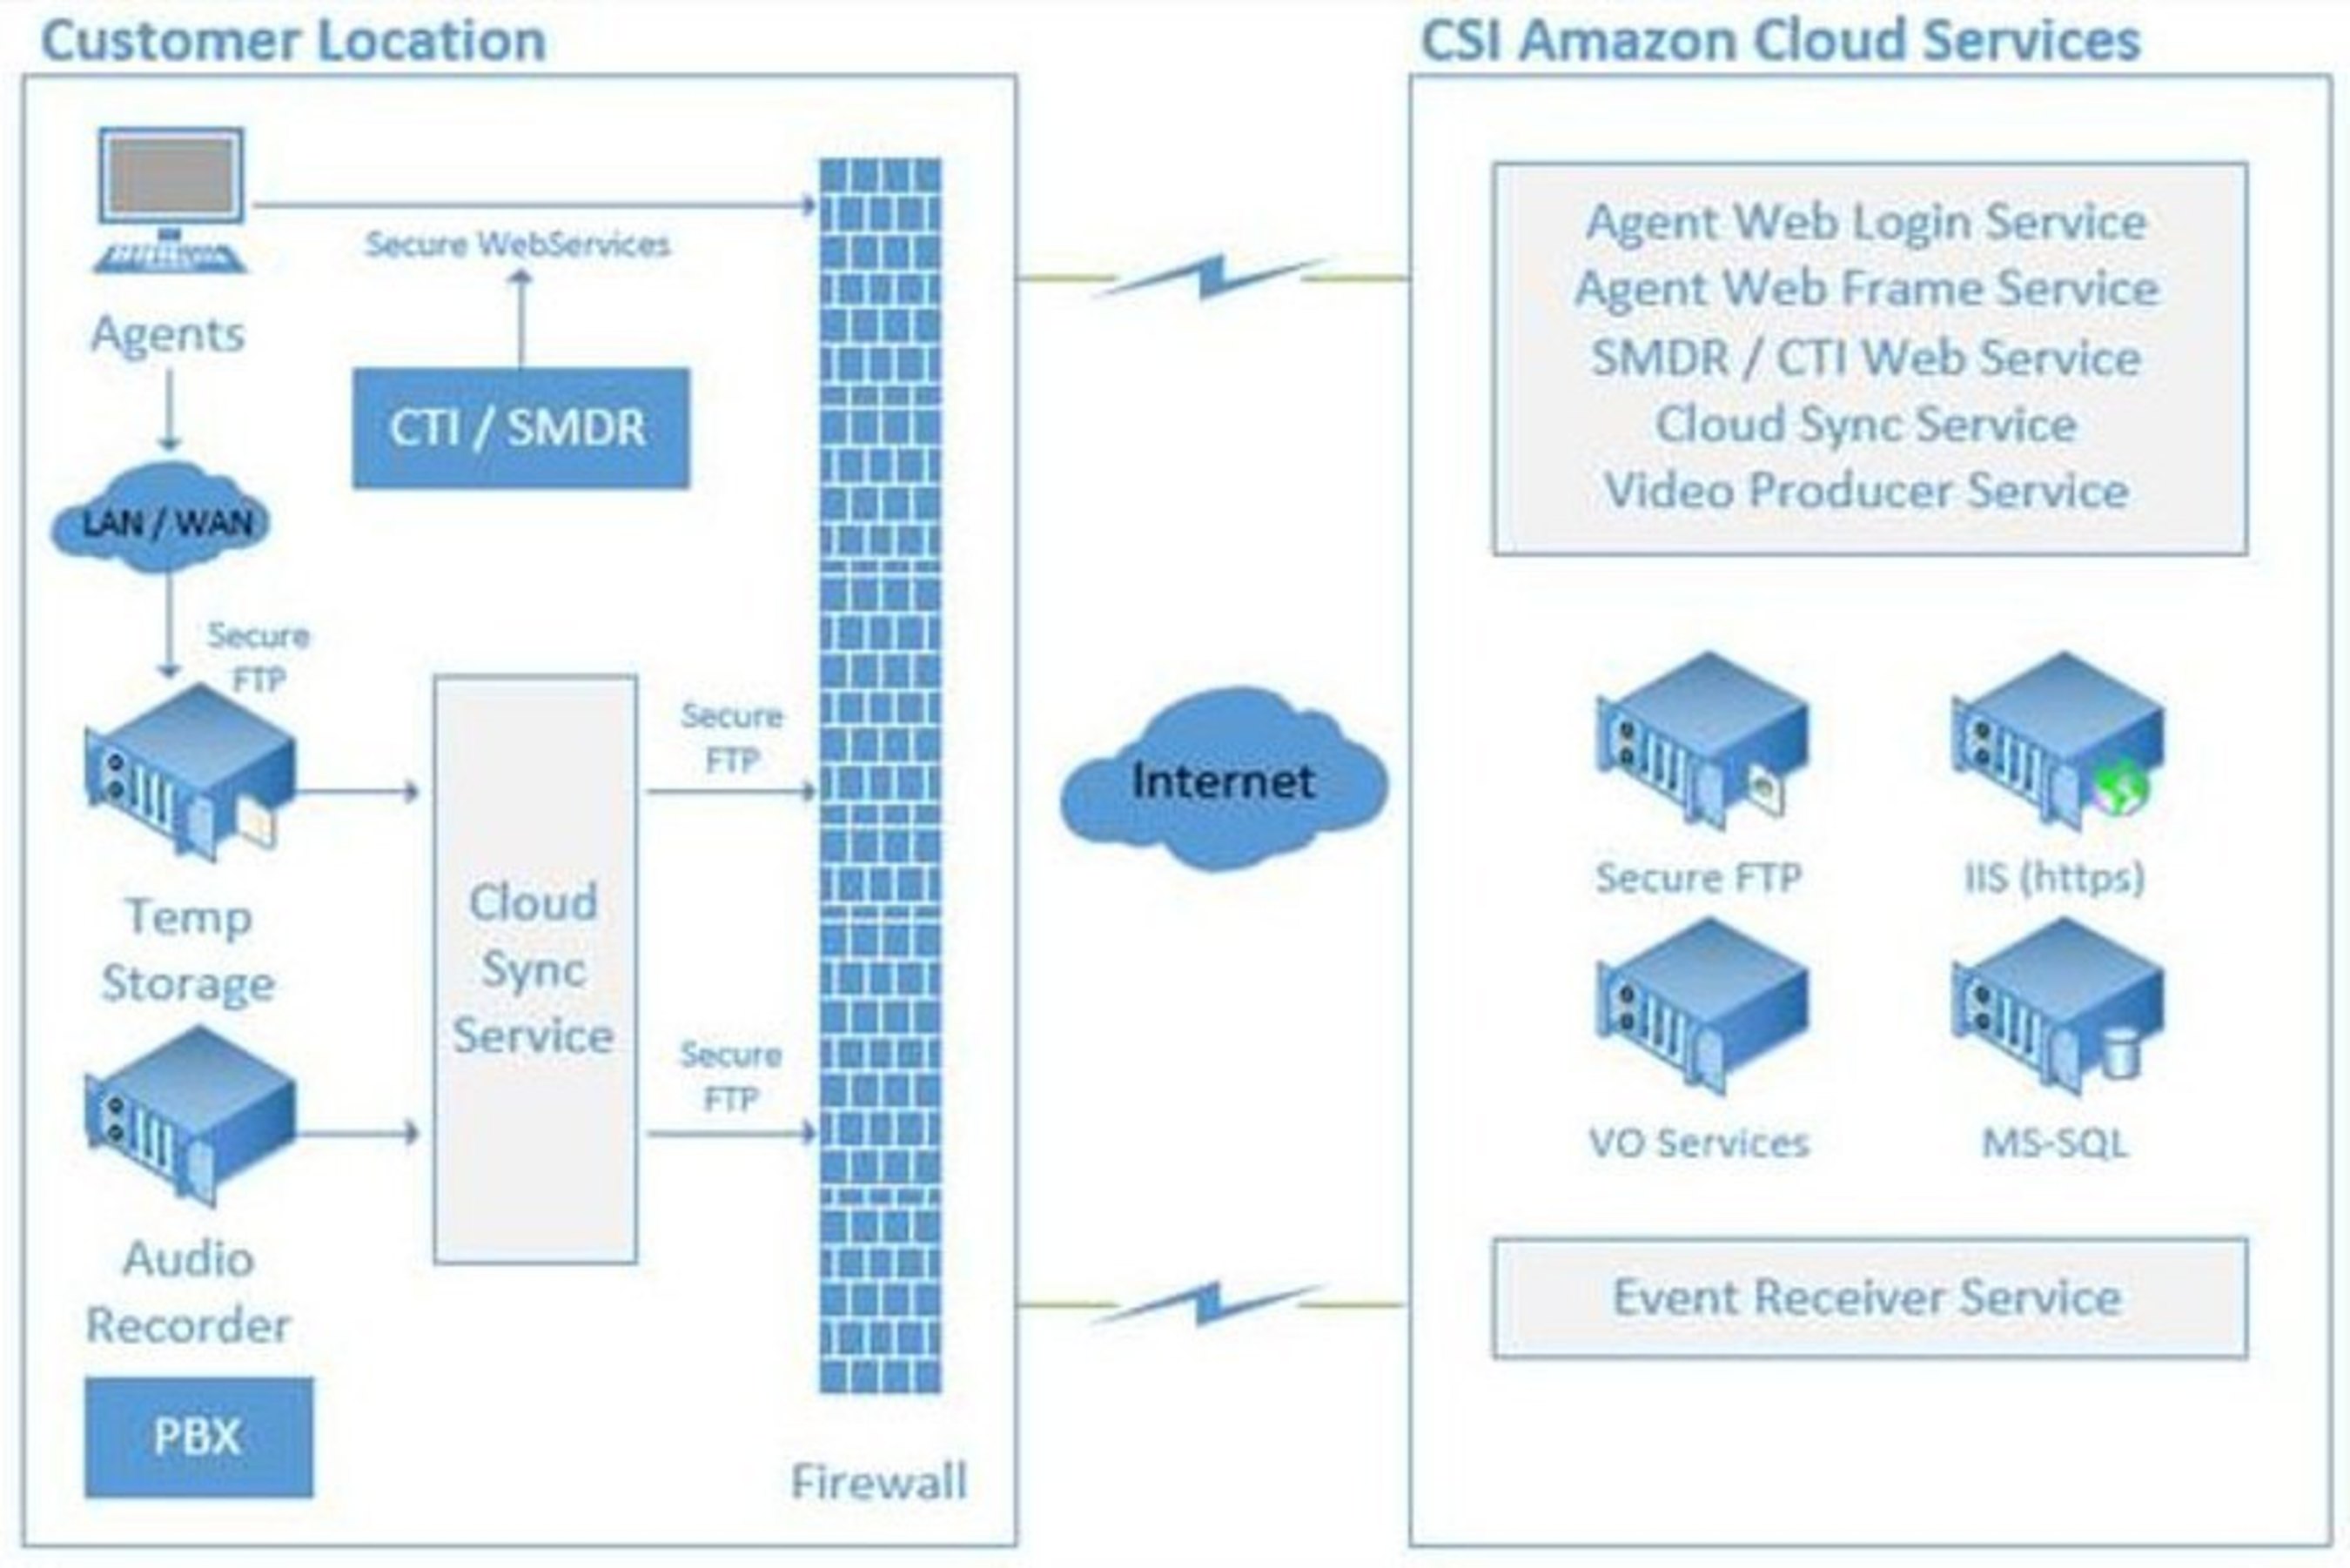 This diagram shows how Virtual Observer is installed into the enterprise to achieve a blended environment where event media (audio and video) are captured, along with enterprise metadata, and securely transmitted to the cloud using standardized secure communications. (PRNewsFoto/ICMI)